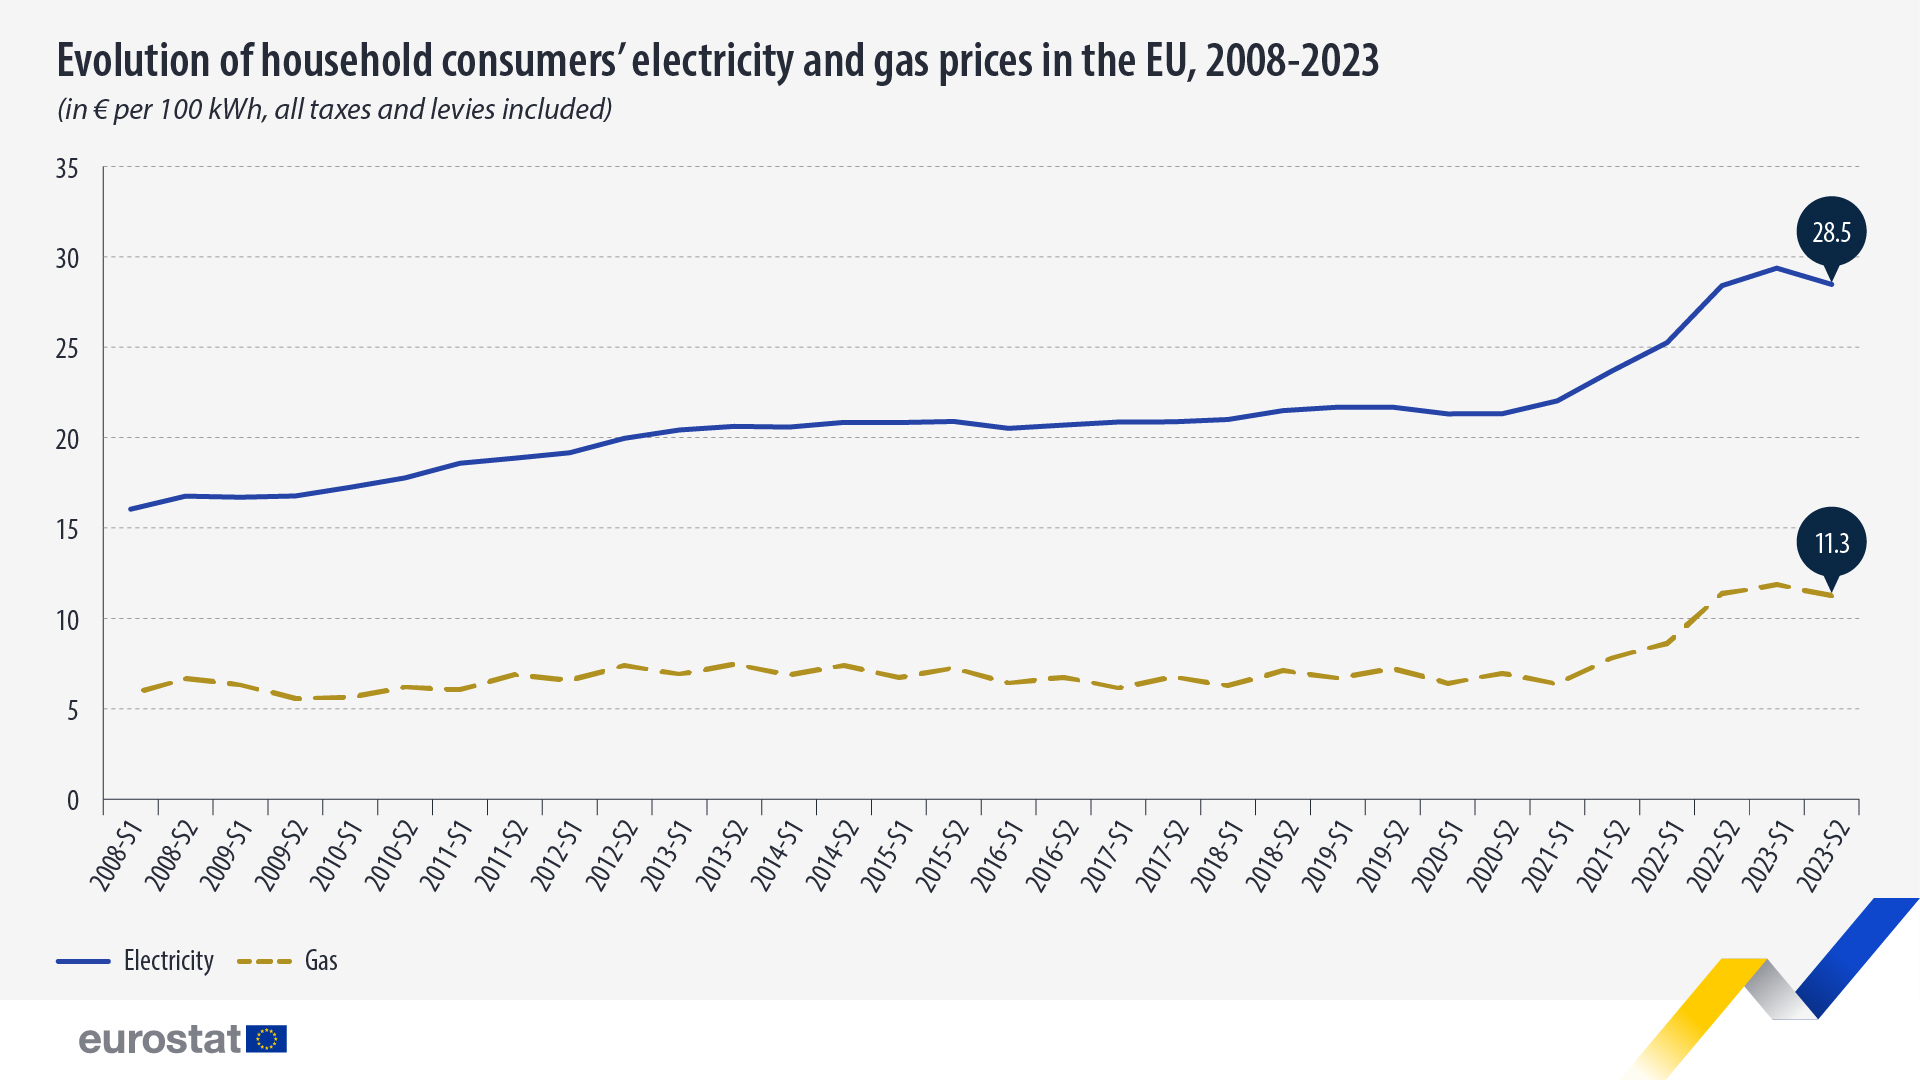 Evolution of household consumers' electricity and gas prices in the EU, 2008-2023. Line graph. For more information click datasets below.